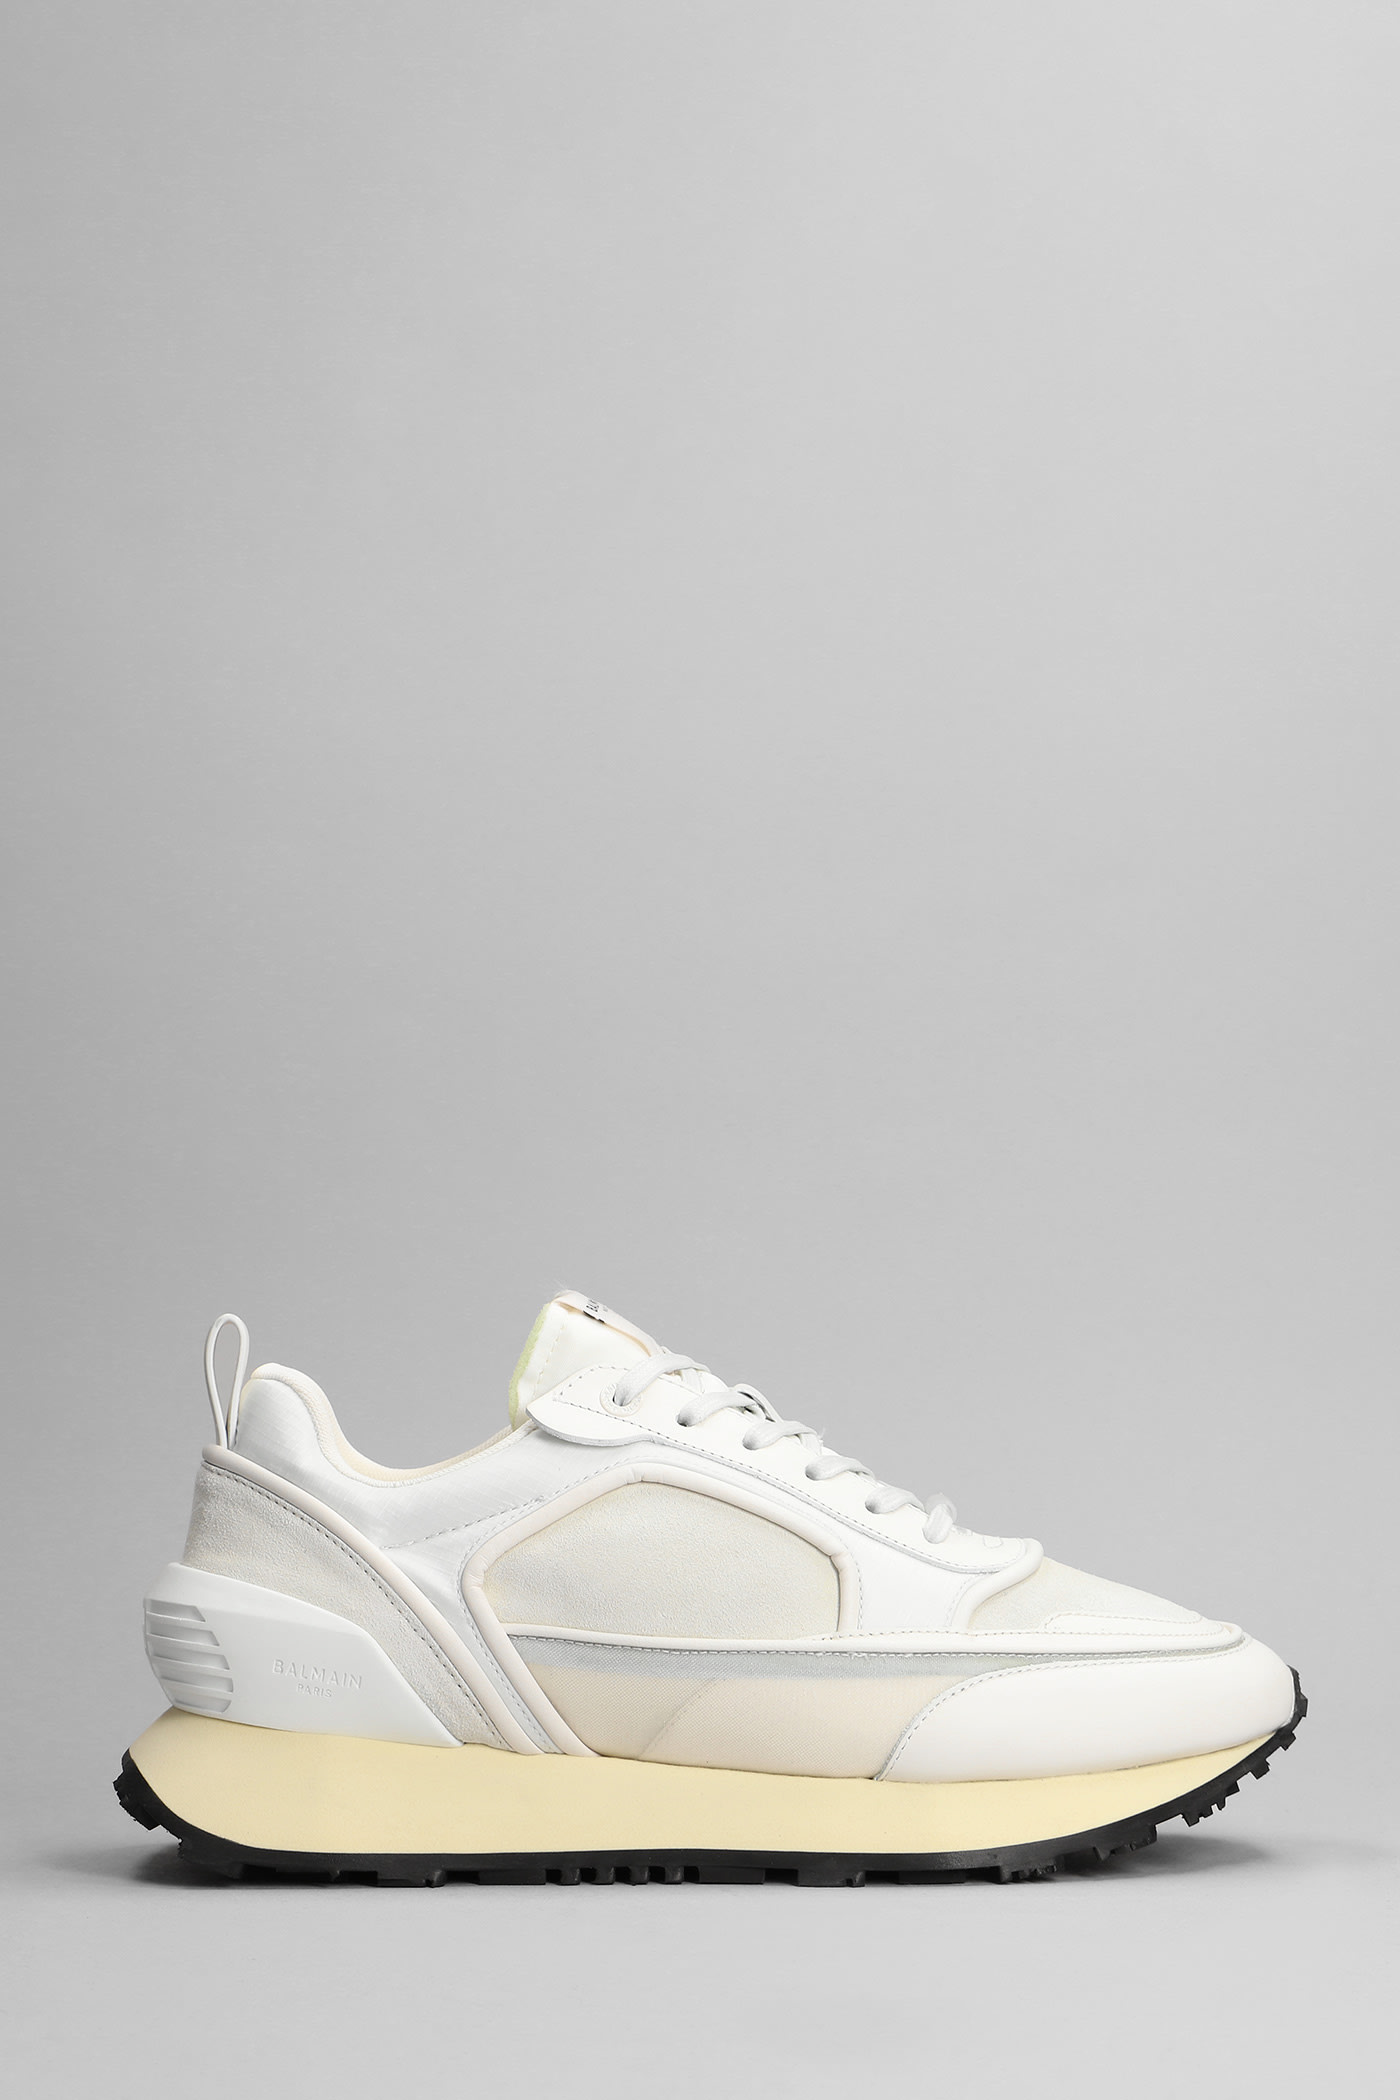 Balmain Racer Sneakers In White Suede And Leather